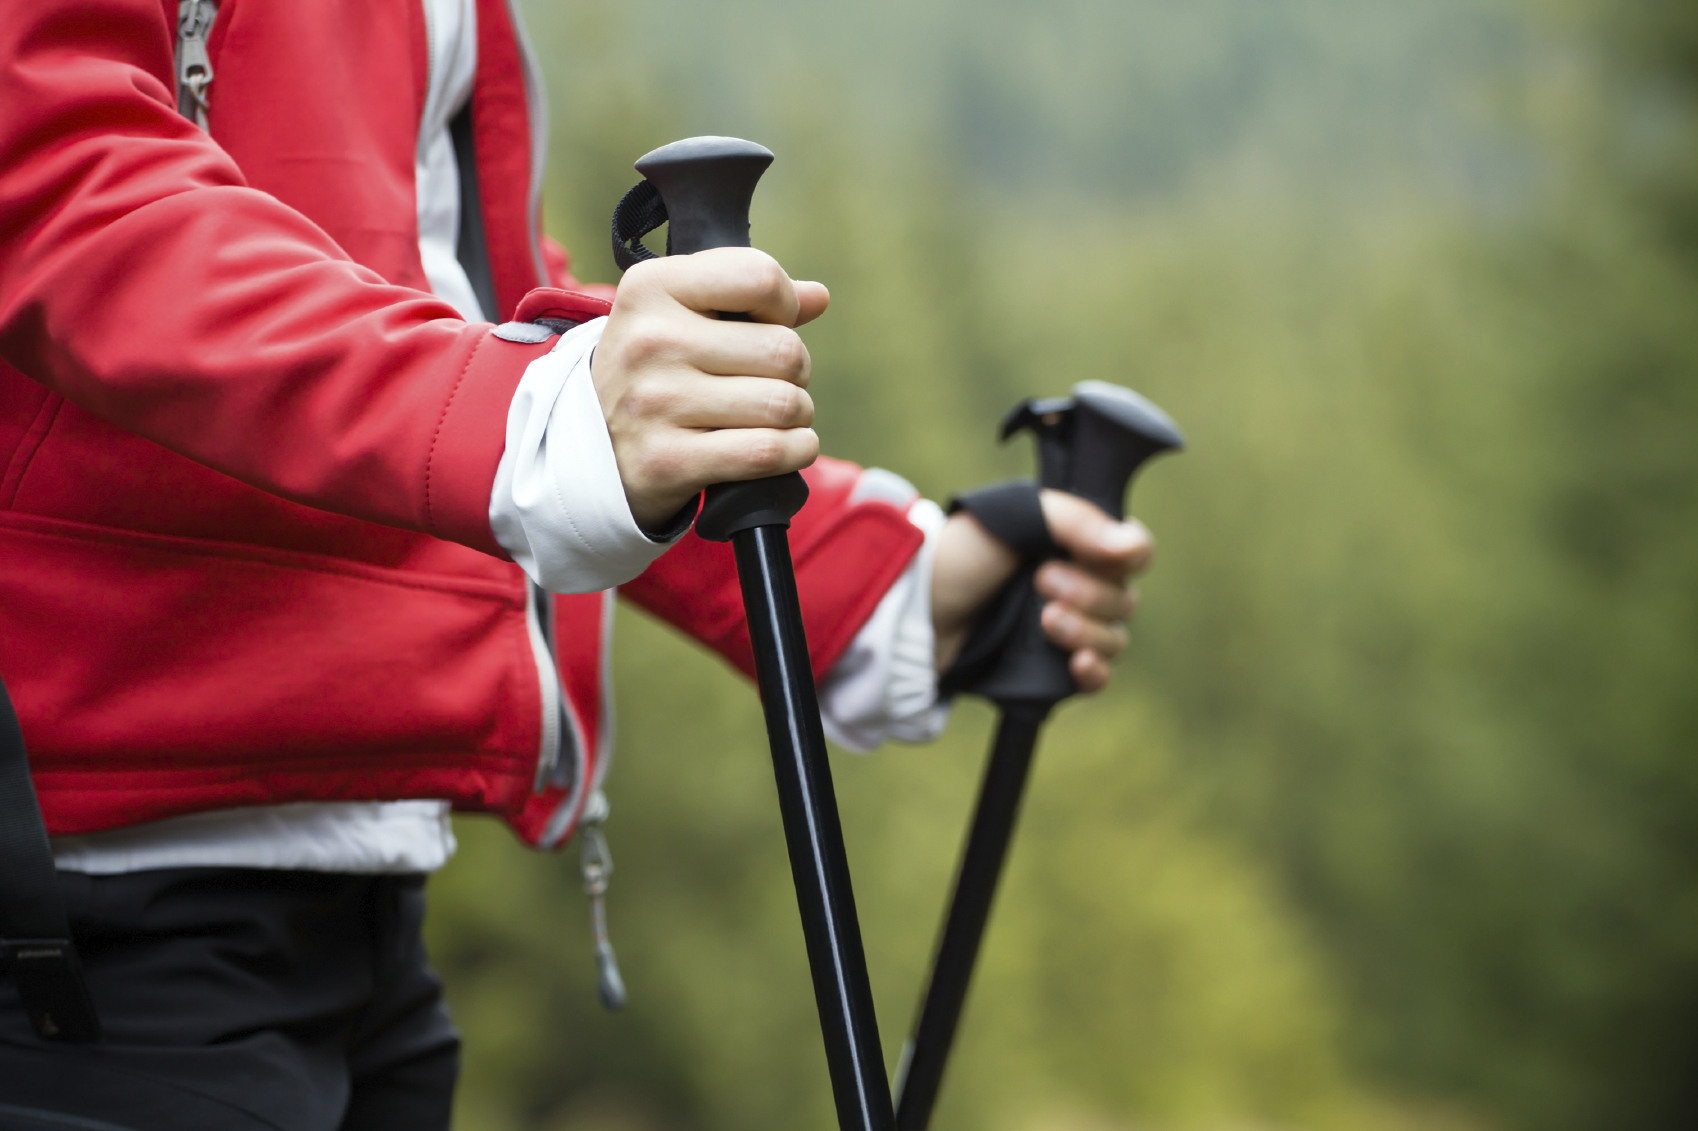 Let's take a pole: Who wants to try Nordic walking?